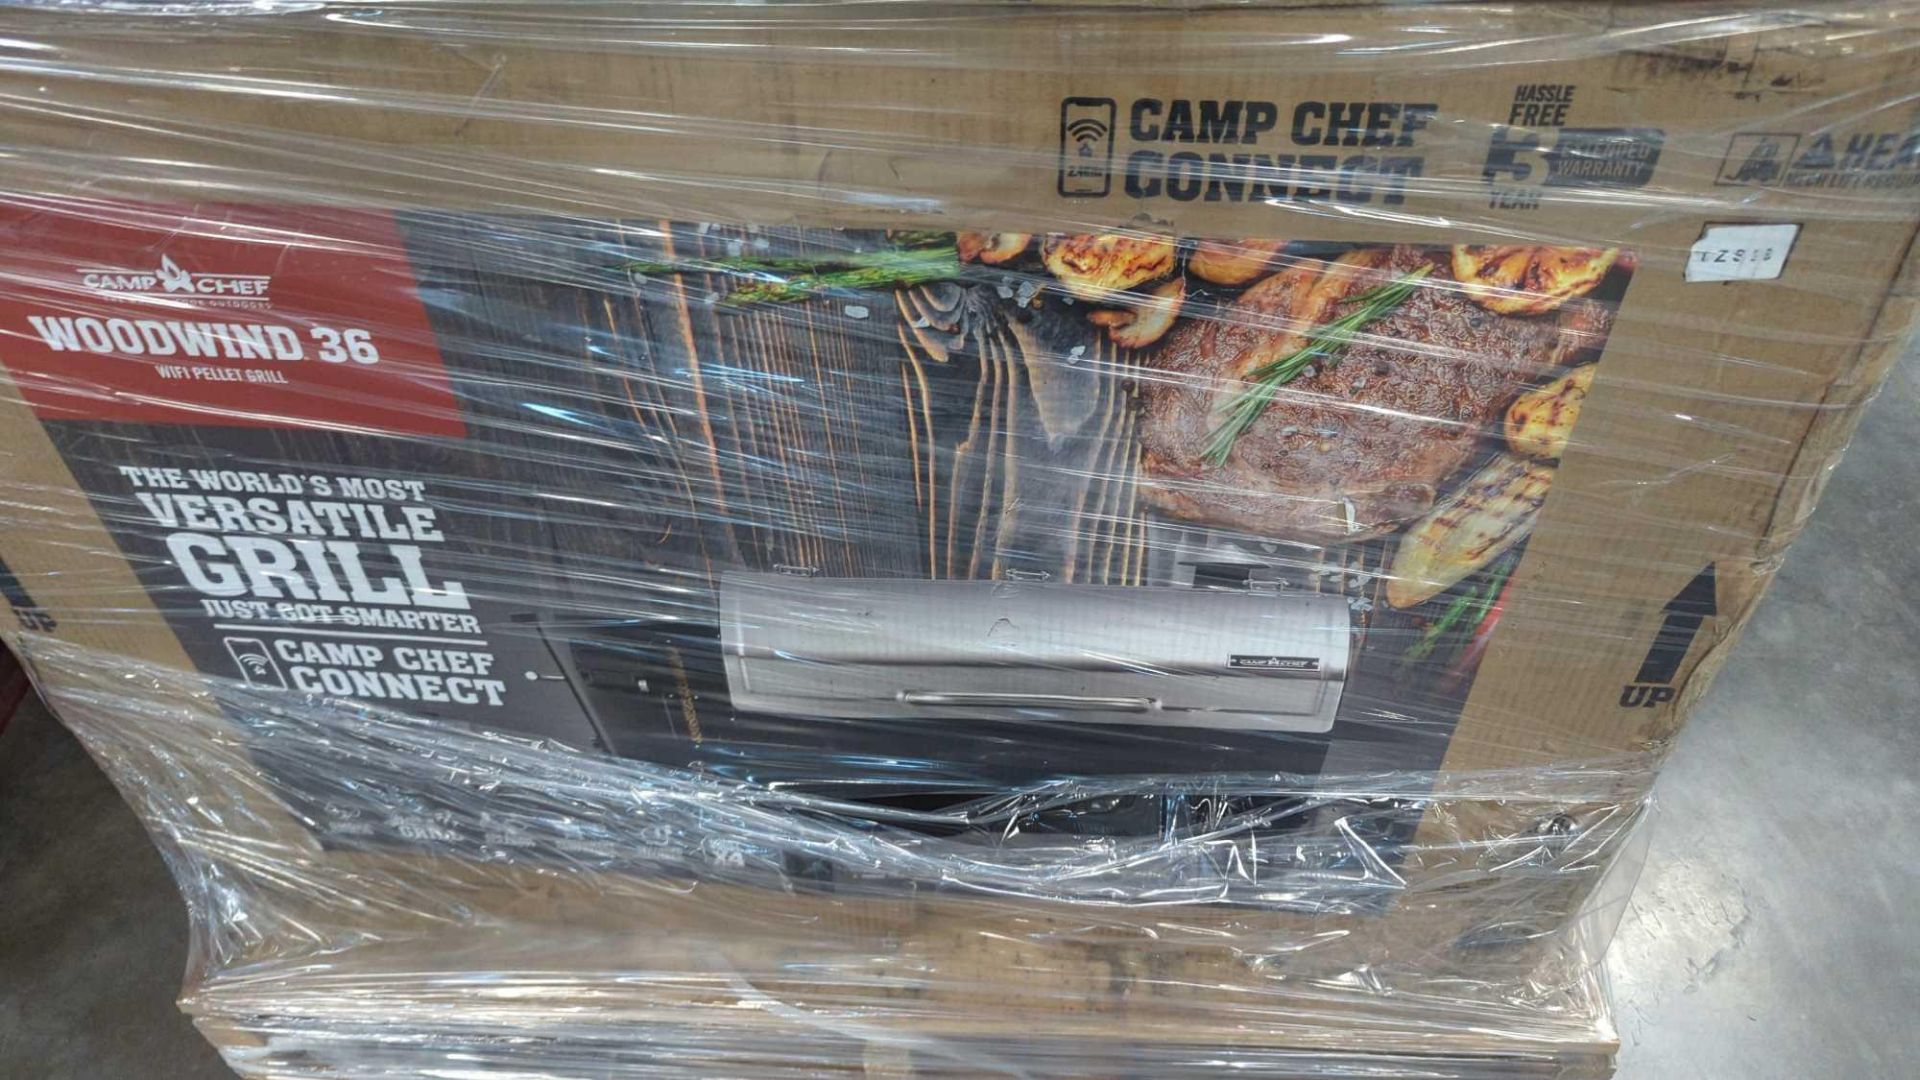 (1) Pallet- Rolled mattress, pondovac 4, Camp chef Woodwind 36 grill and more - Image 3 of 8